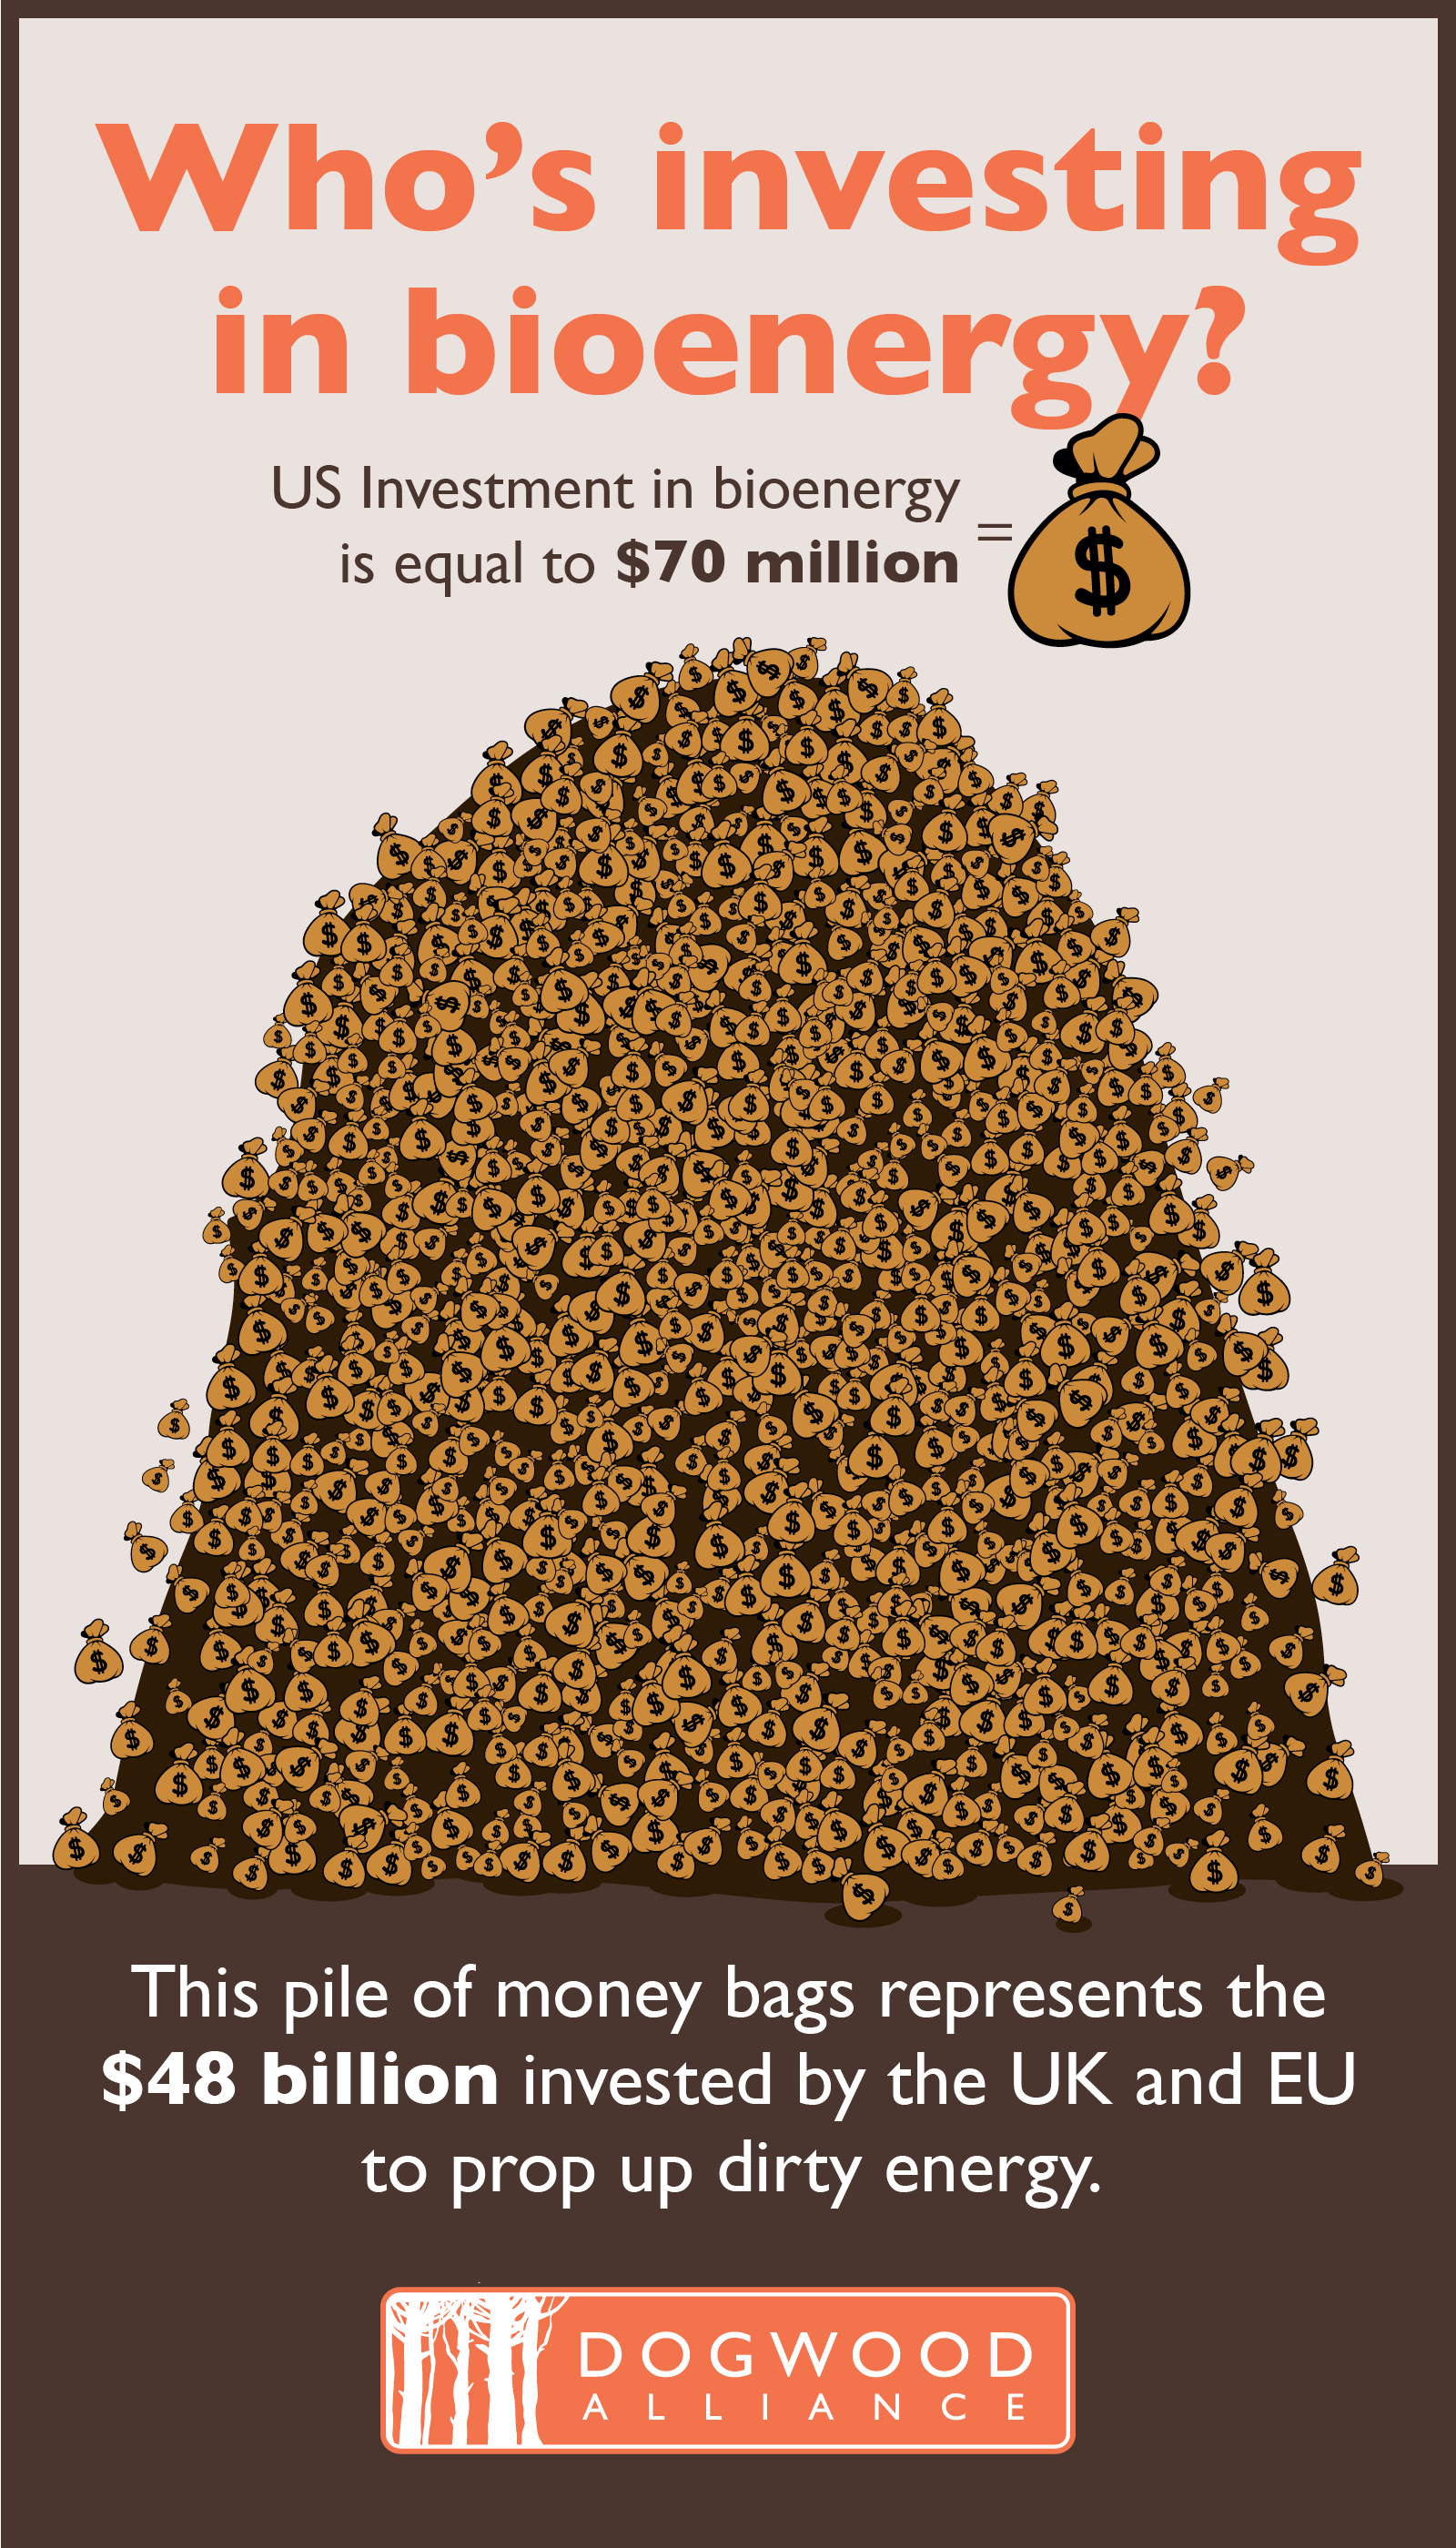 foreign governments invest over 650 times more money into bioenergy than the US does.